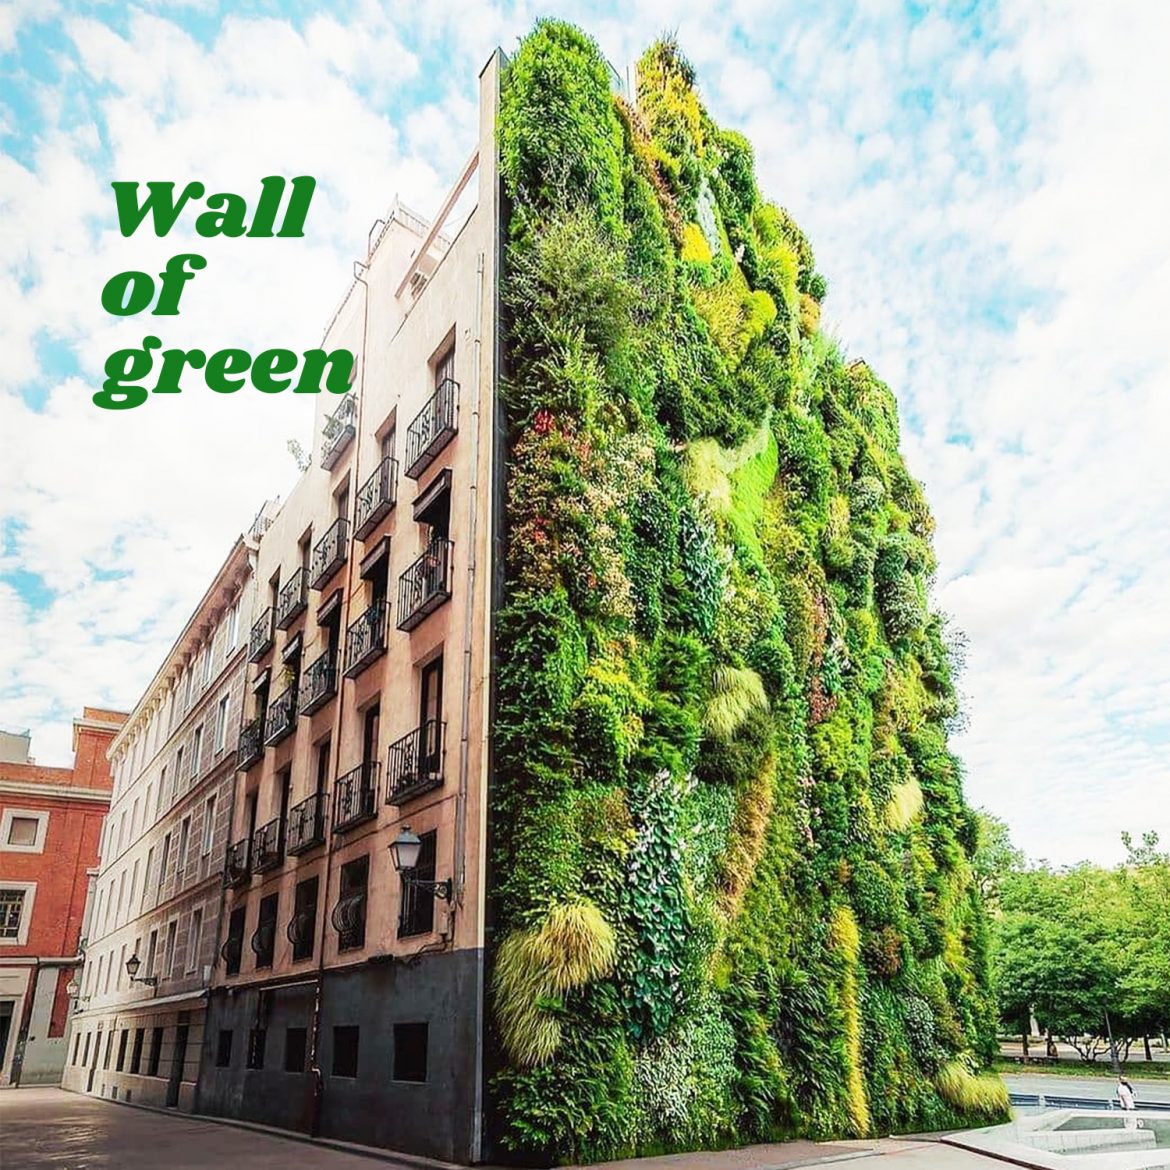 Wall of green